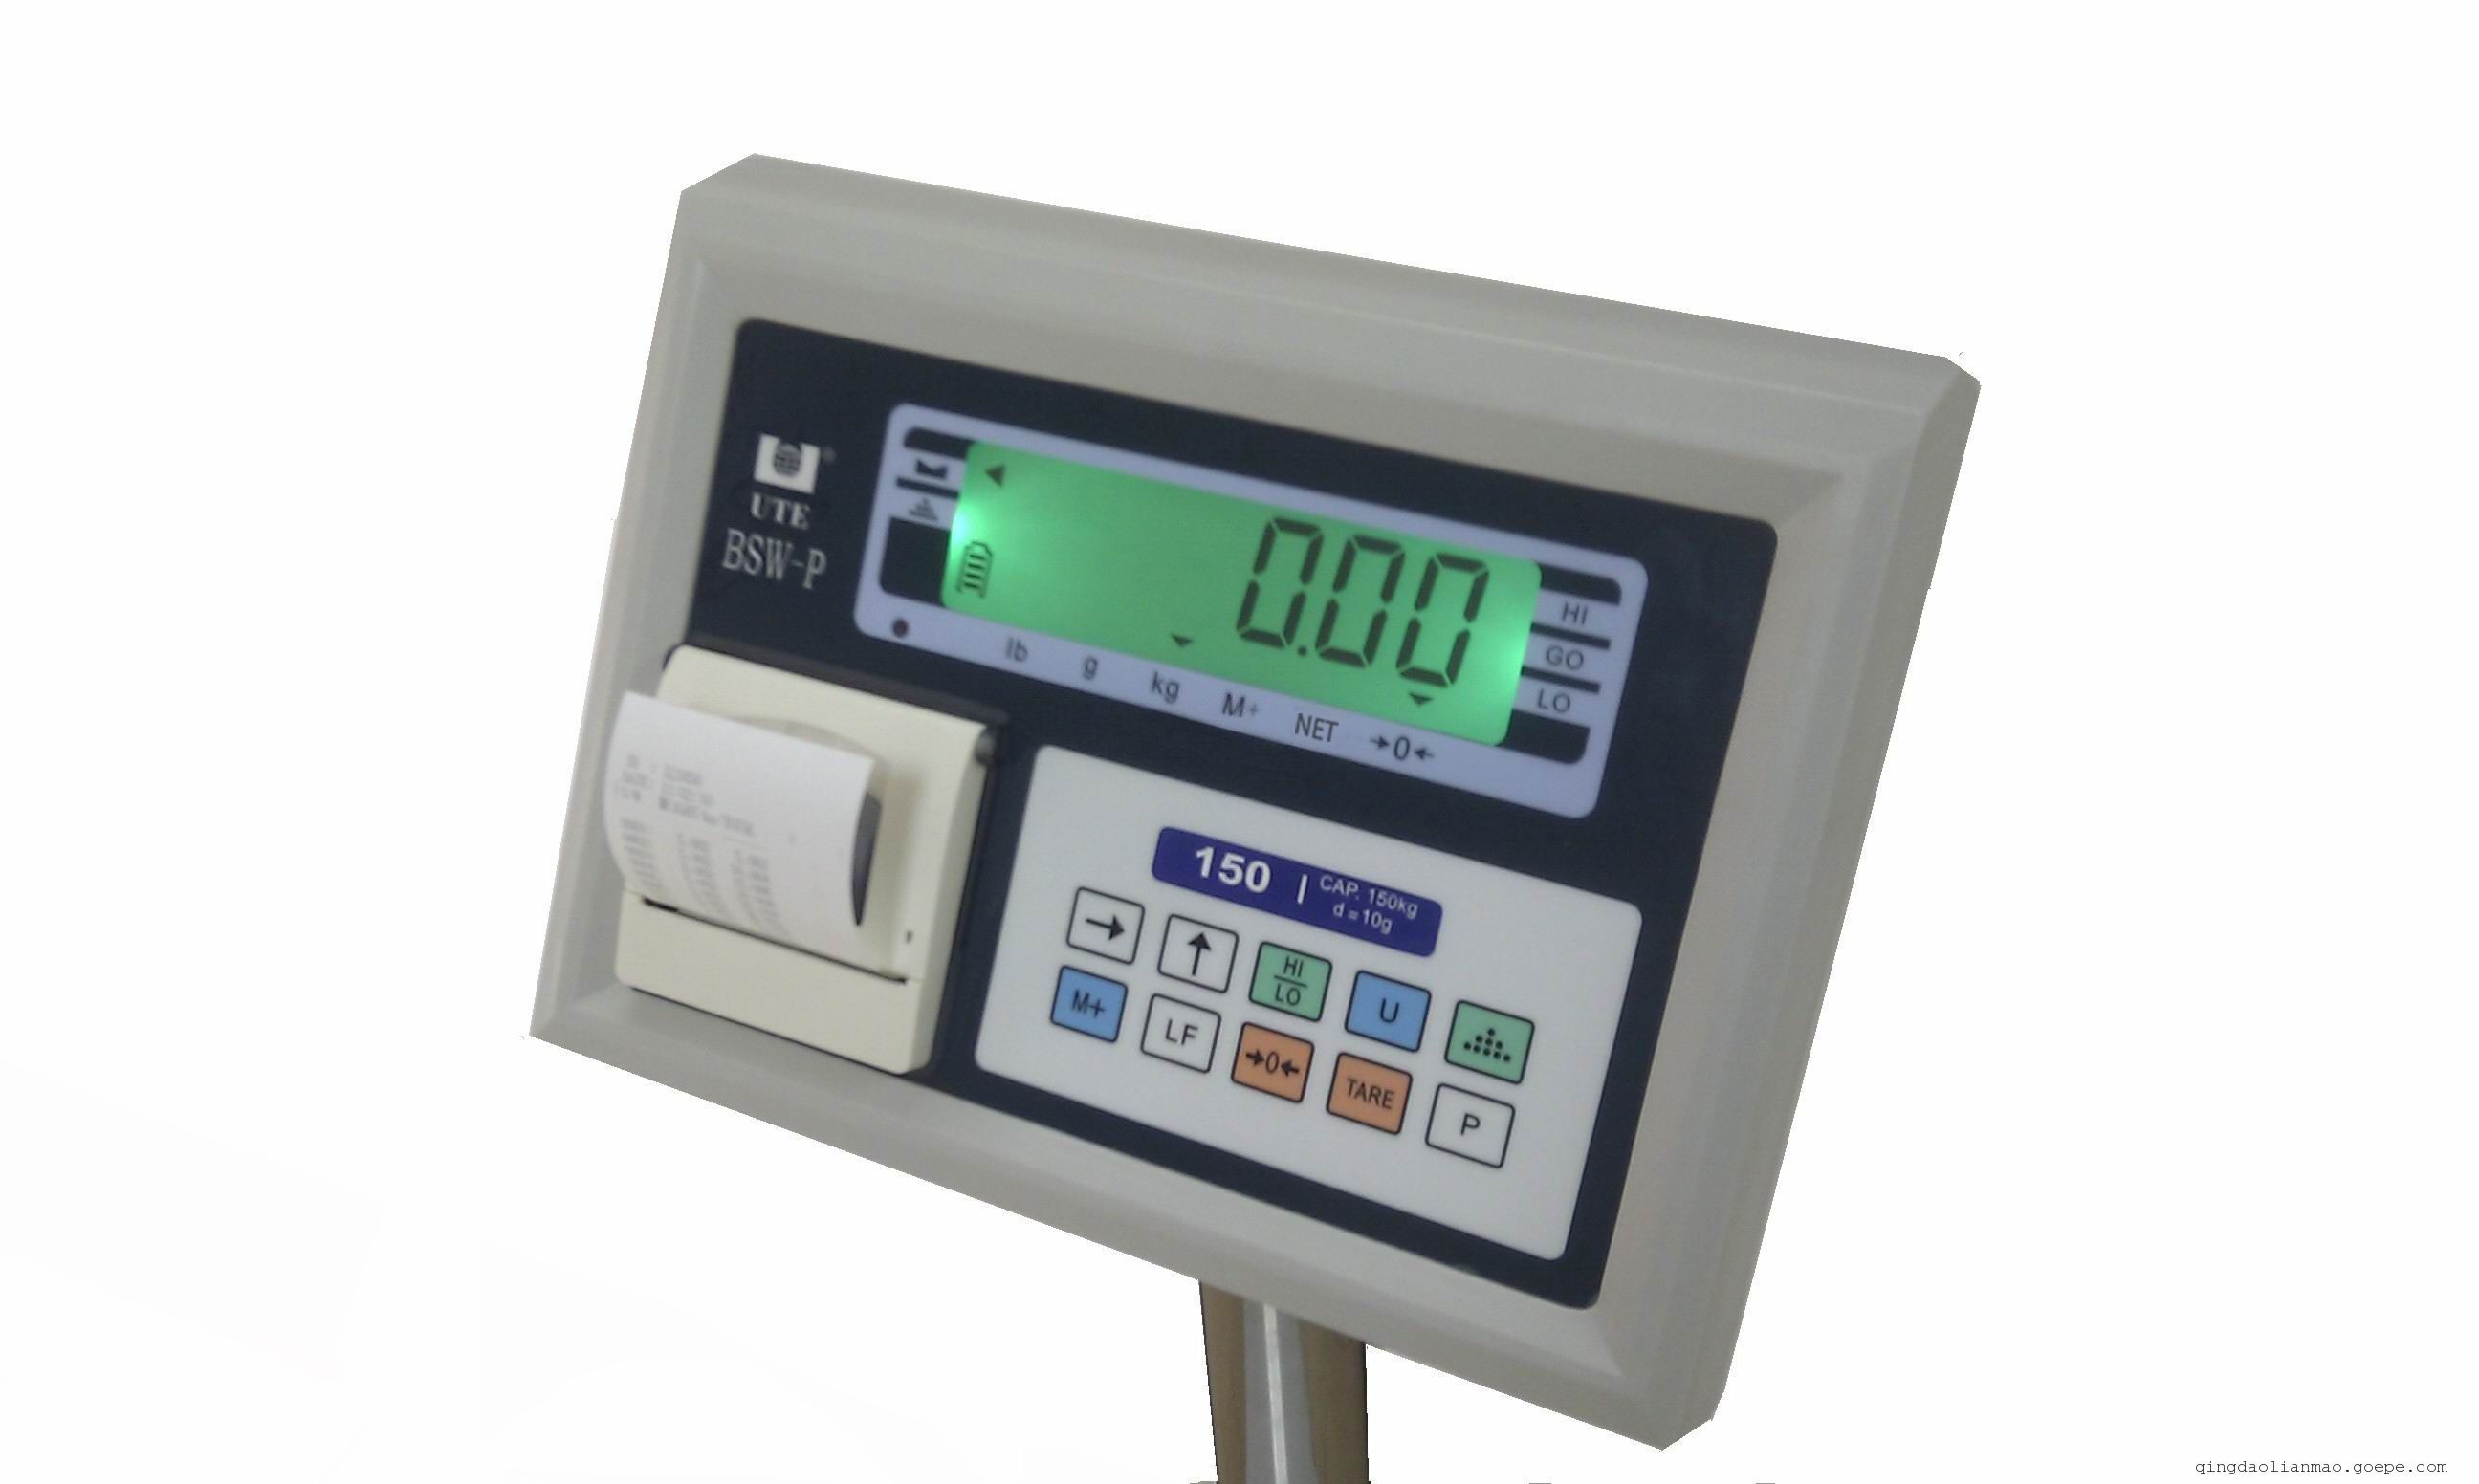 Embedded Thermal Printer CSN-A1 in Platform Scale